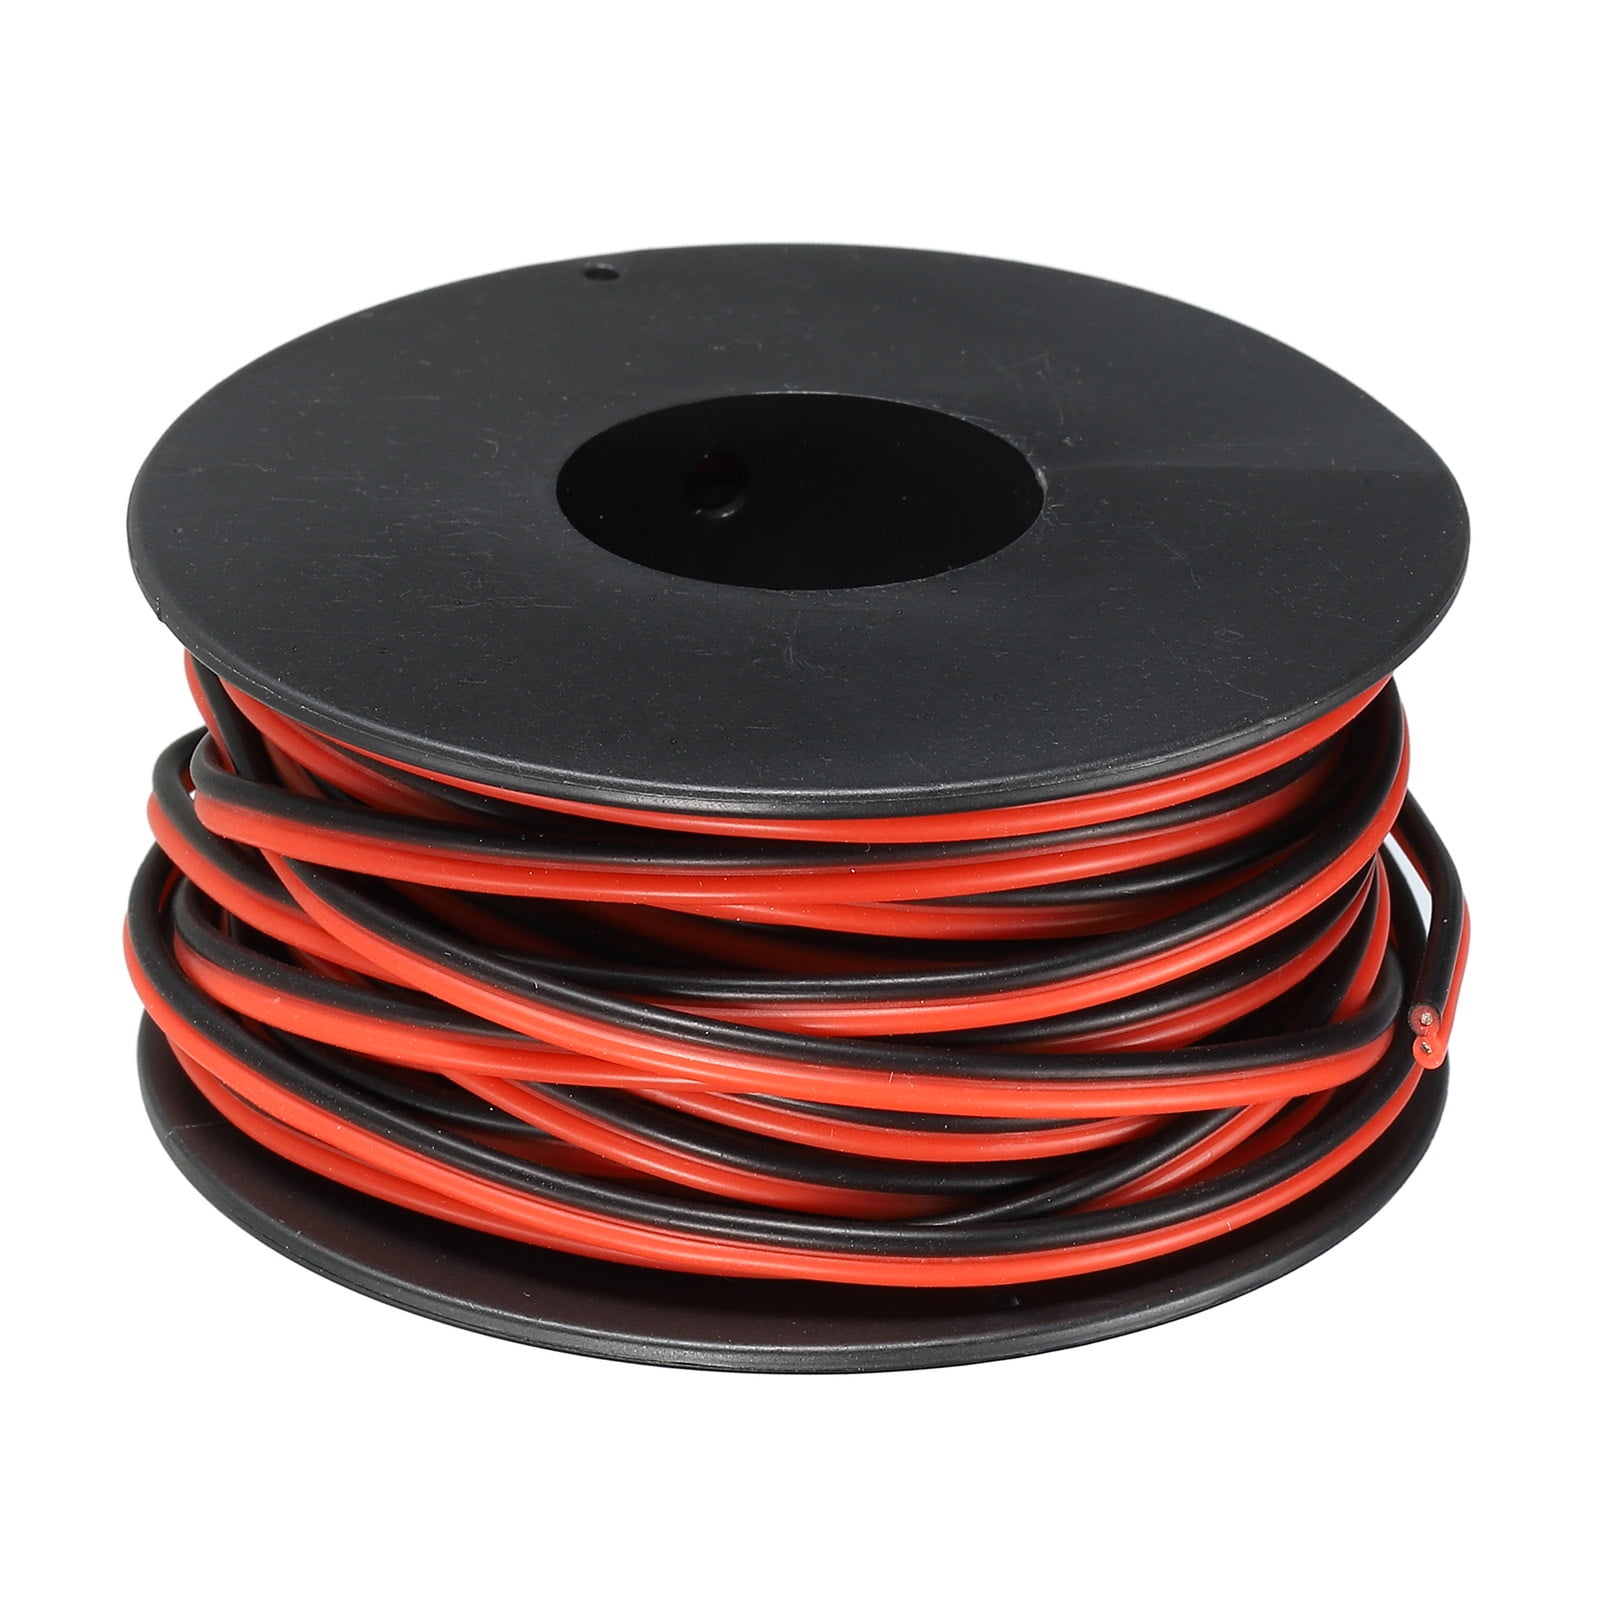 24 Gauge Insulated Magnet Wire, 1/2 Pound Roll (395' Approx.) 24AWG MW24-1/2